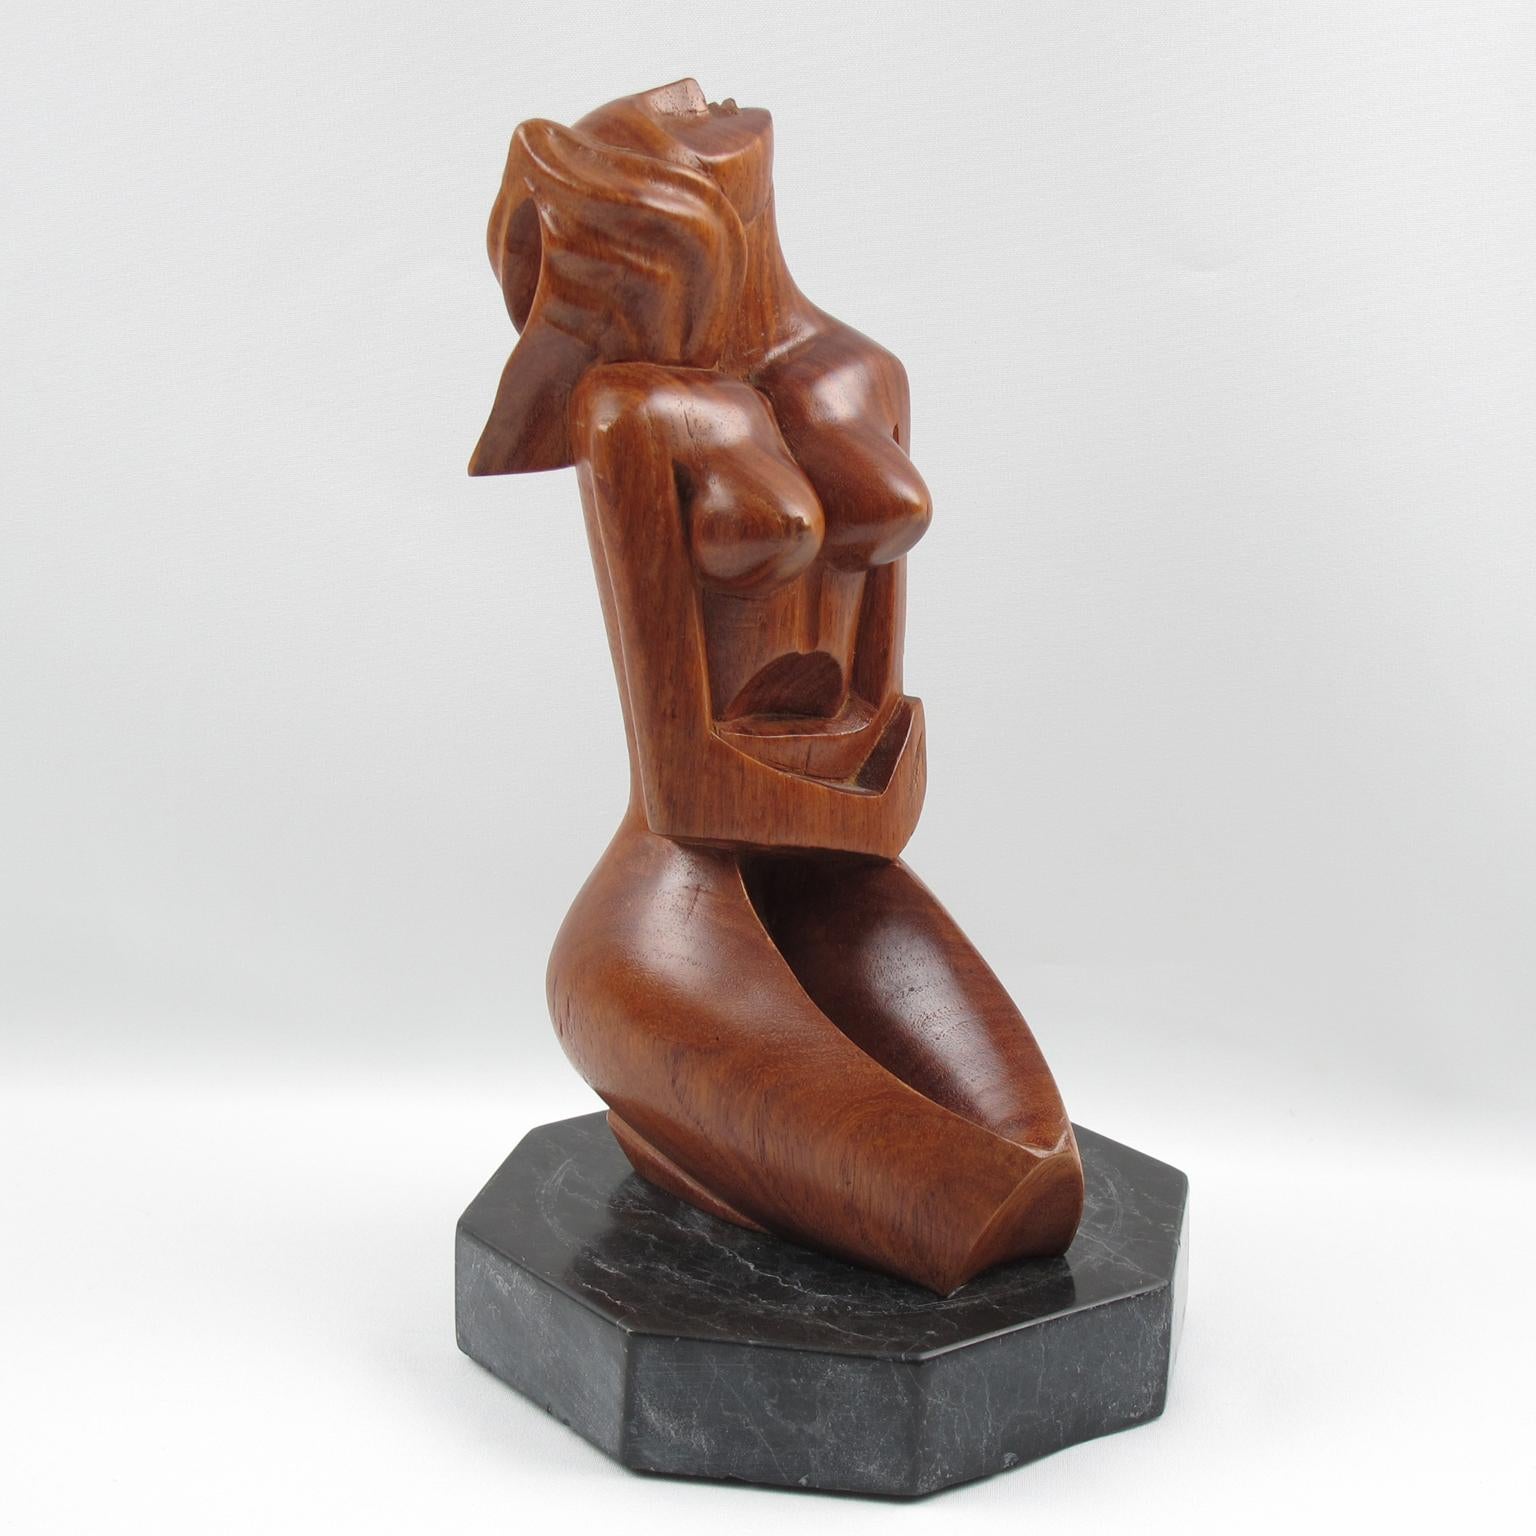 Stunning modernist 1950s wood sculpture, featuring a crouched woman in cubist style carving. Very nice carved movement of the body and the unusual position of the head. Tropical wood all hand-carved, seating on a large faceted black marble base. No